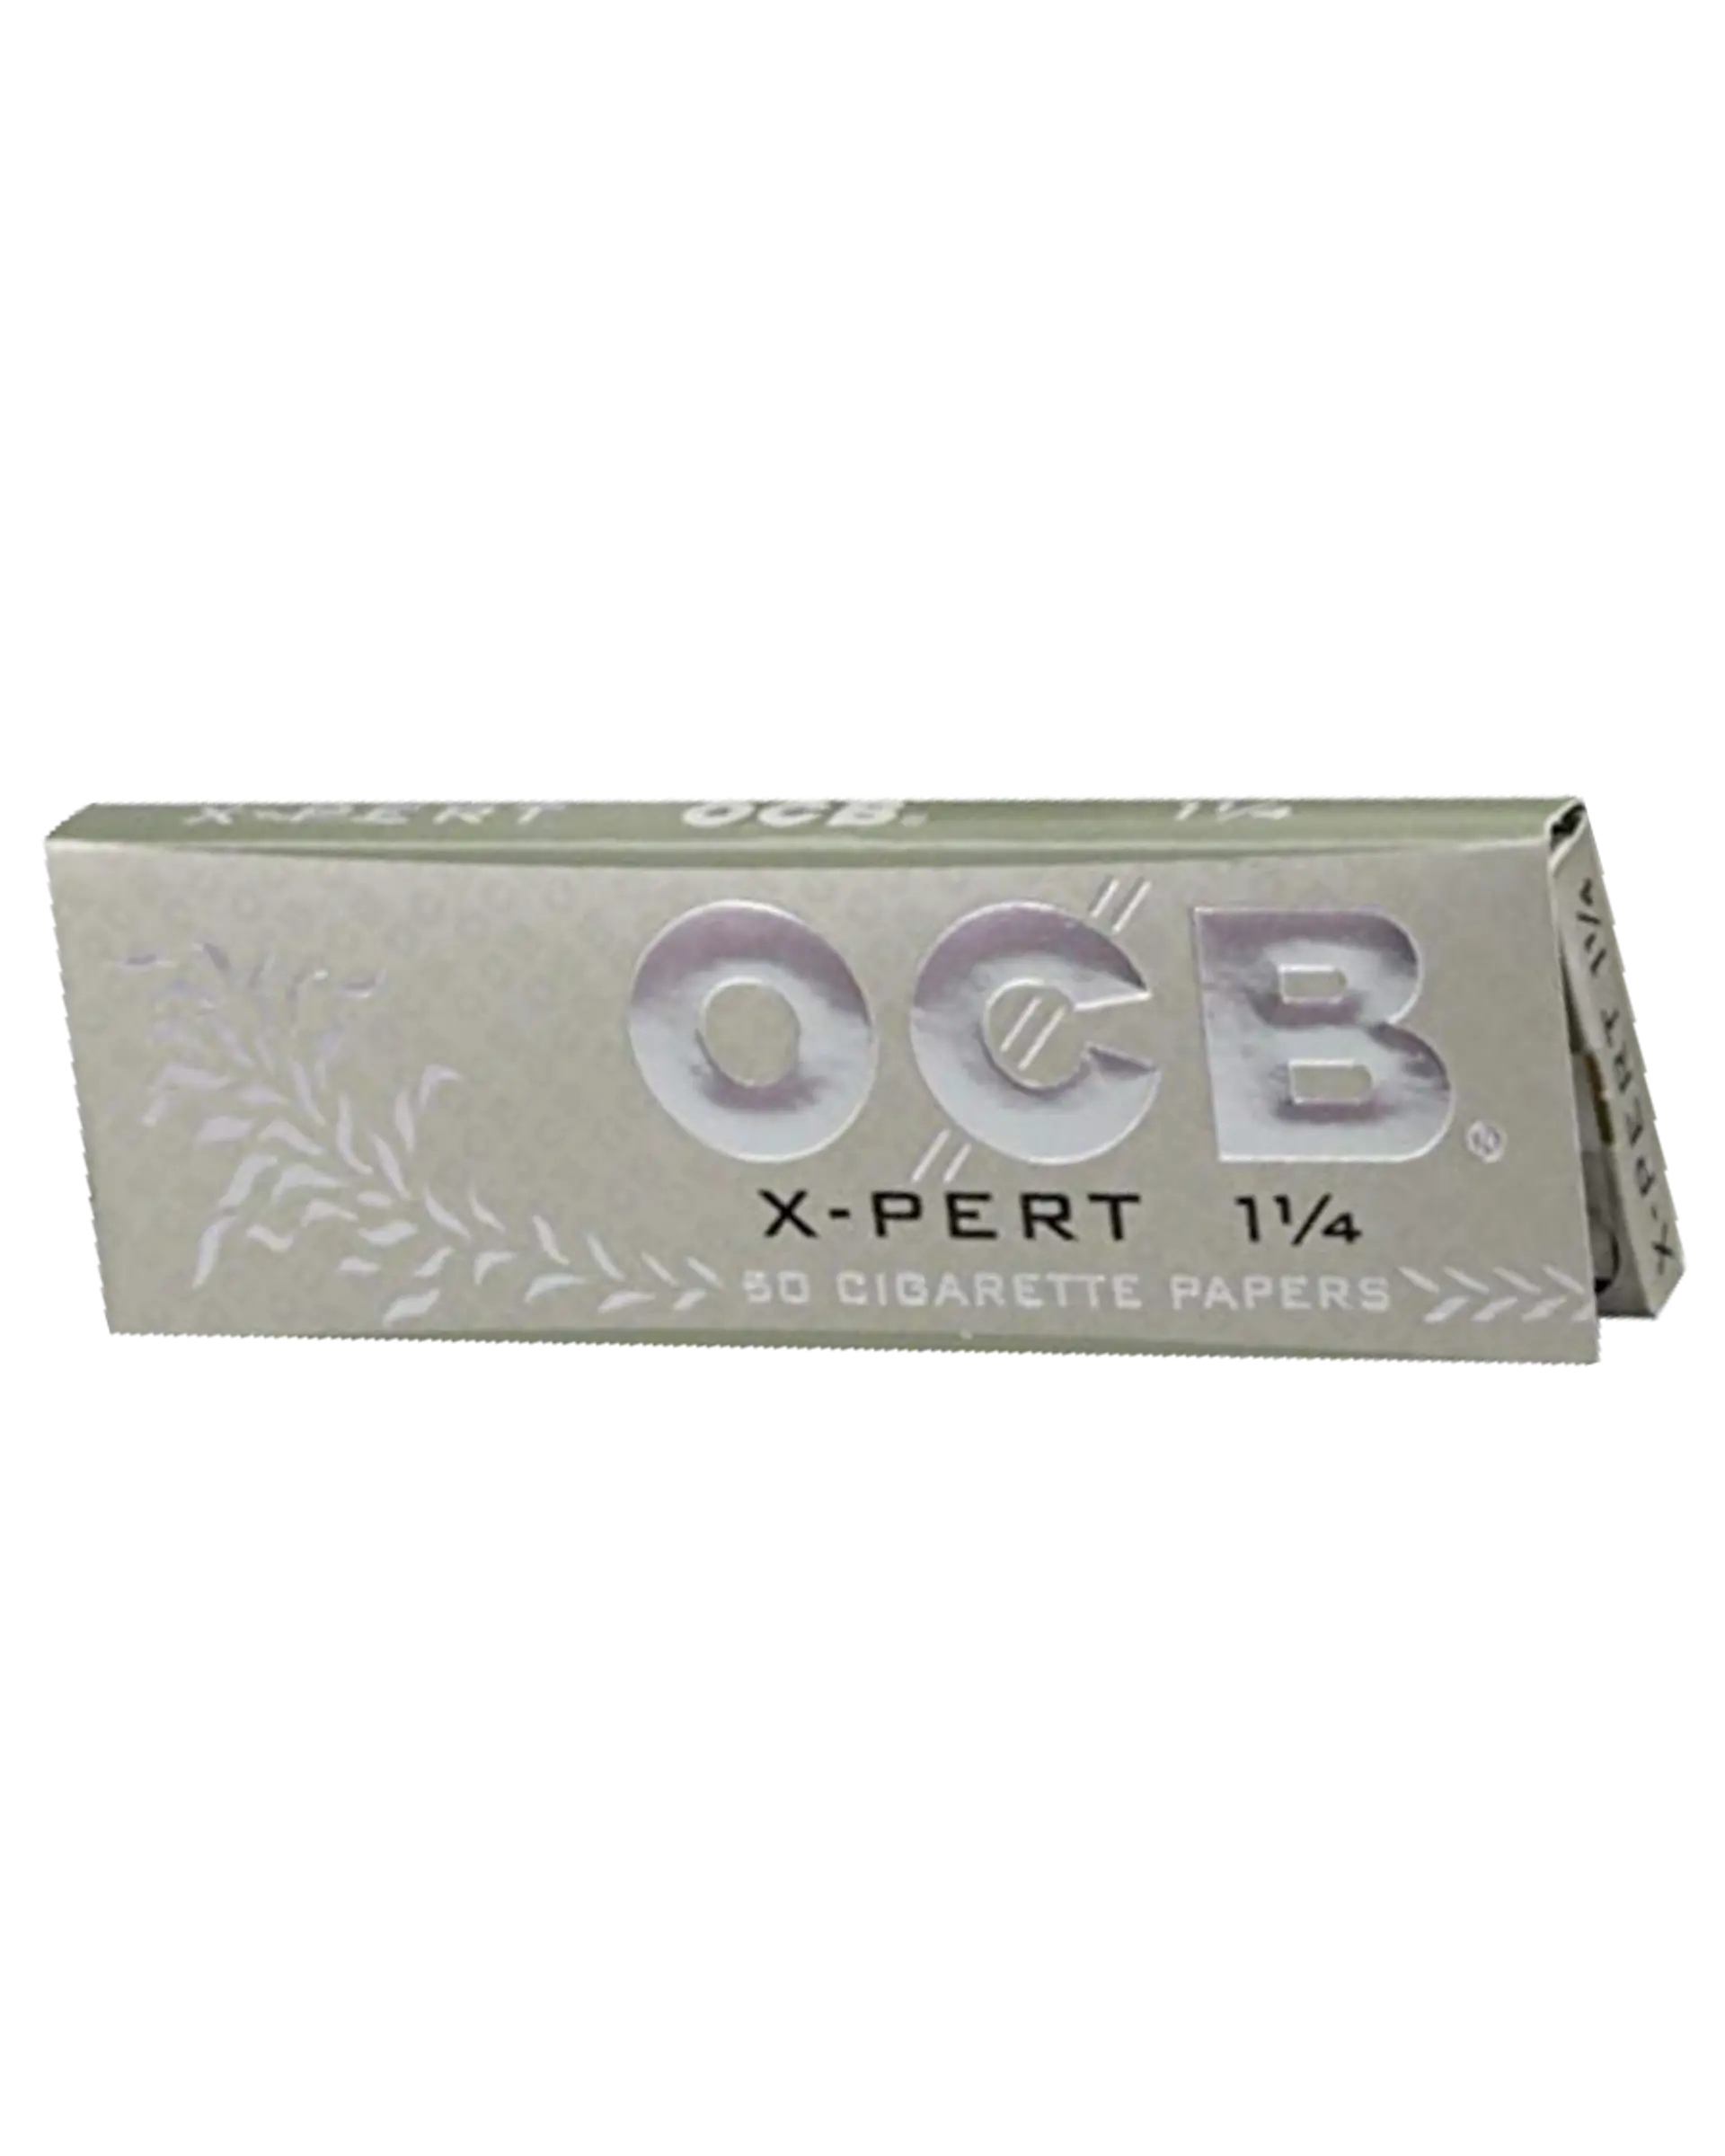 Ocb X-pert Rolling Papers, 1 of 1